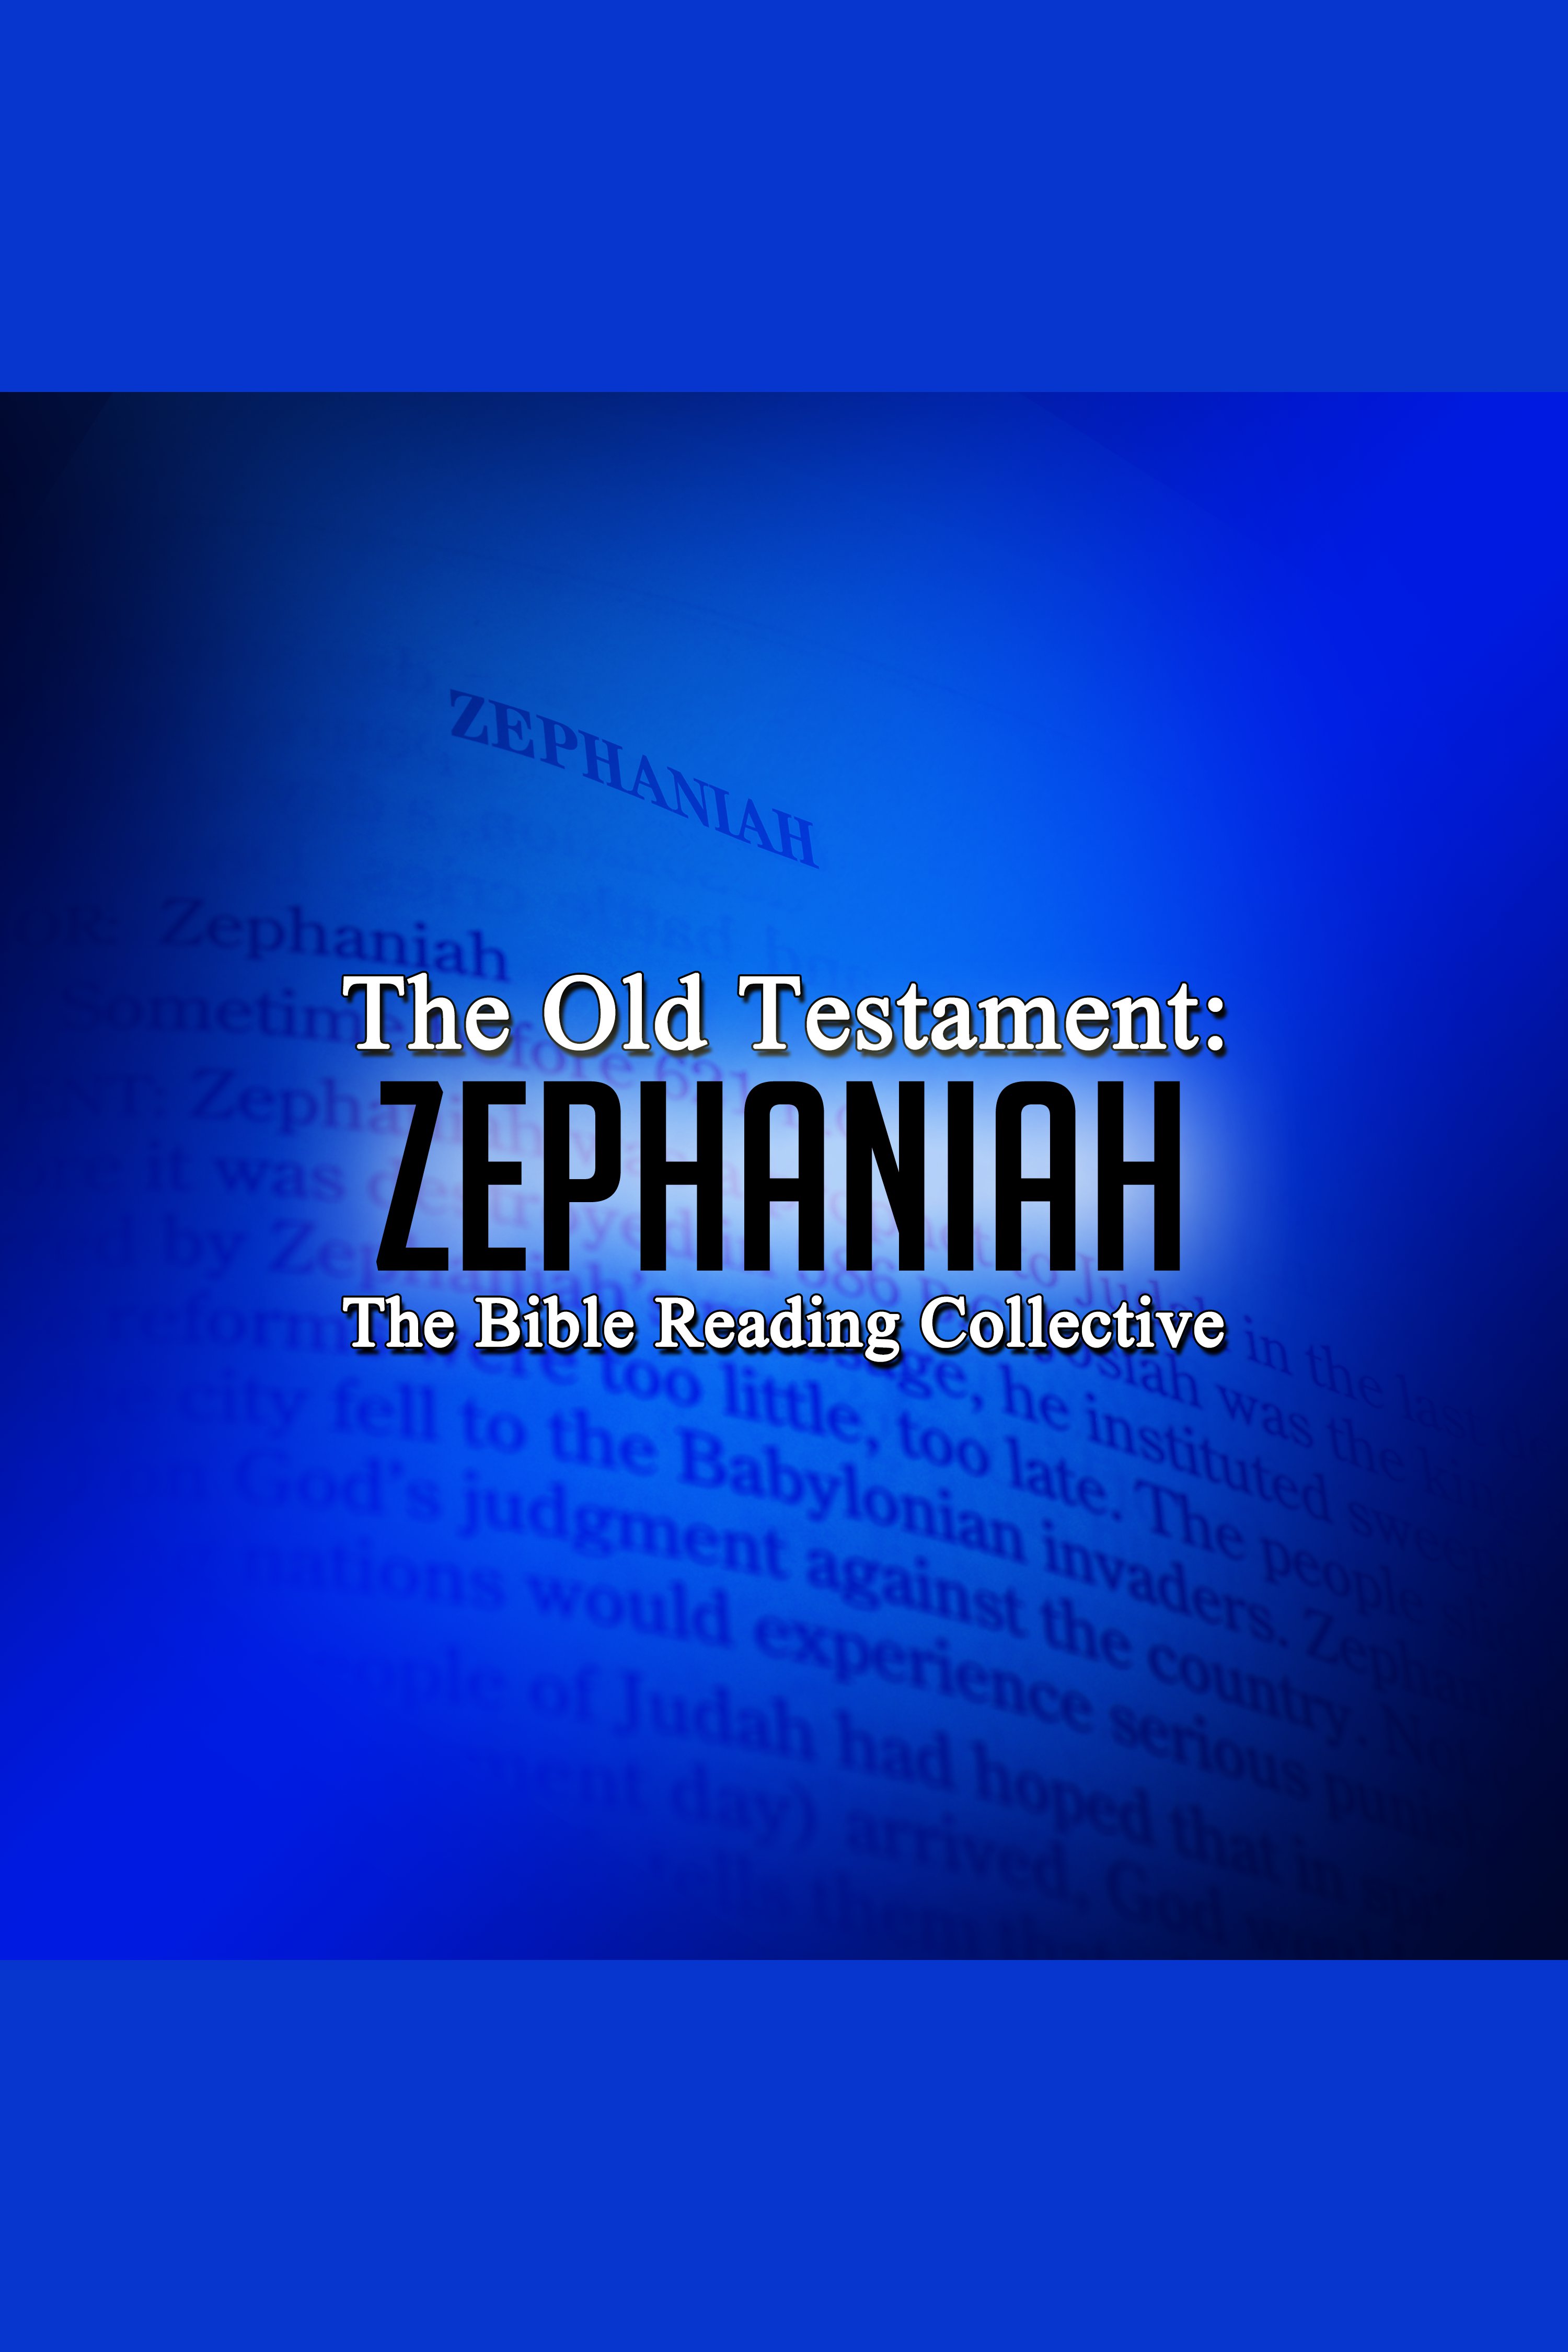 The Old Testament: Zephaniah cover image